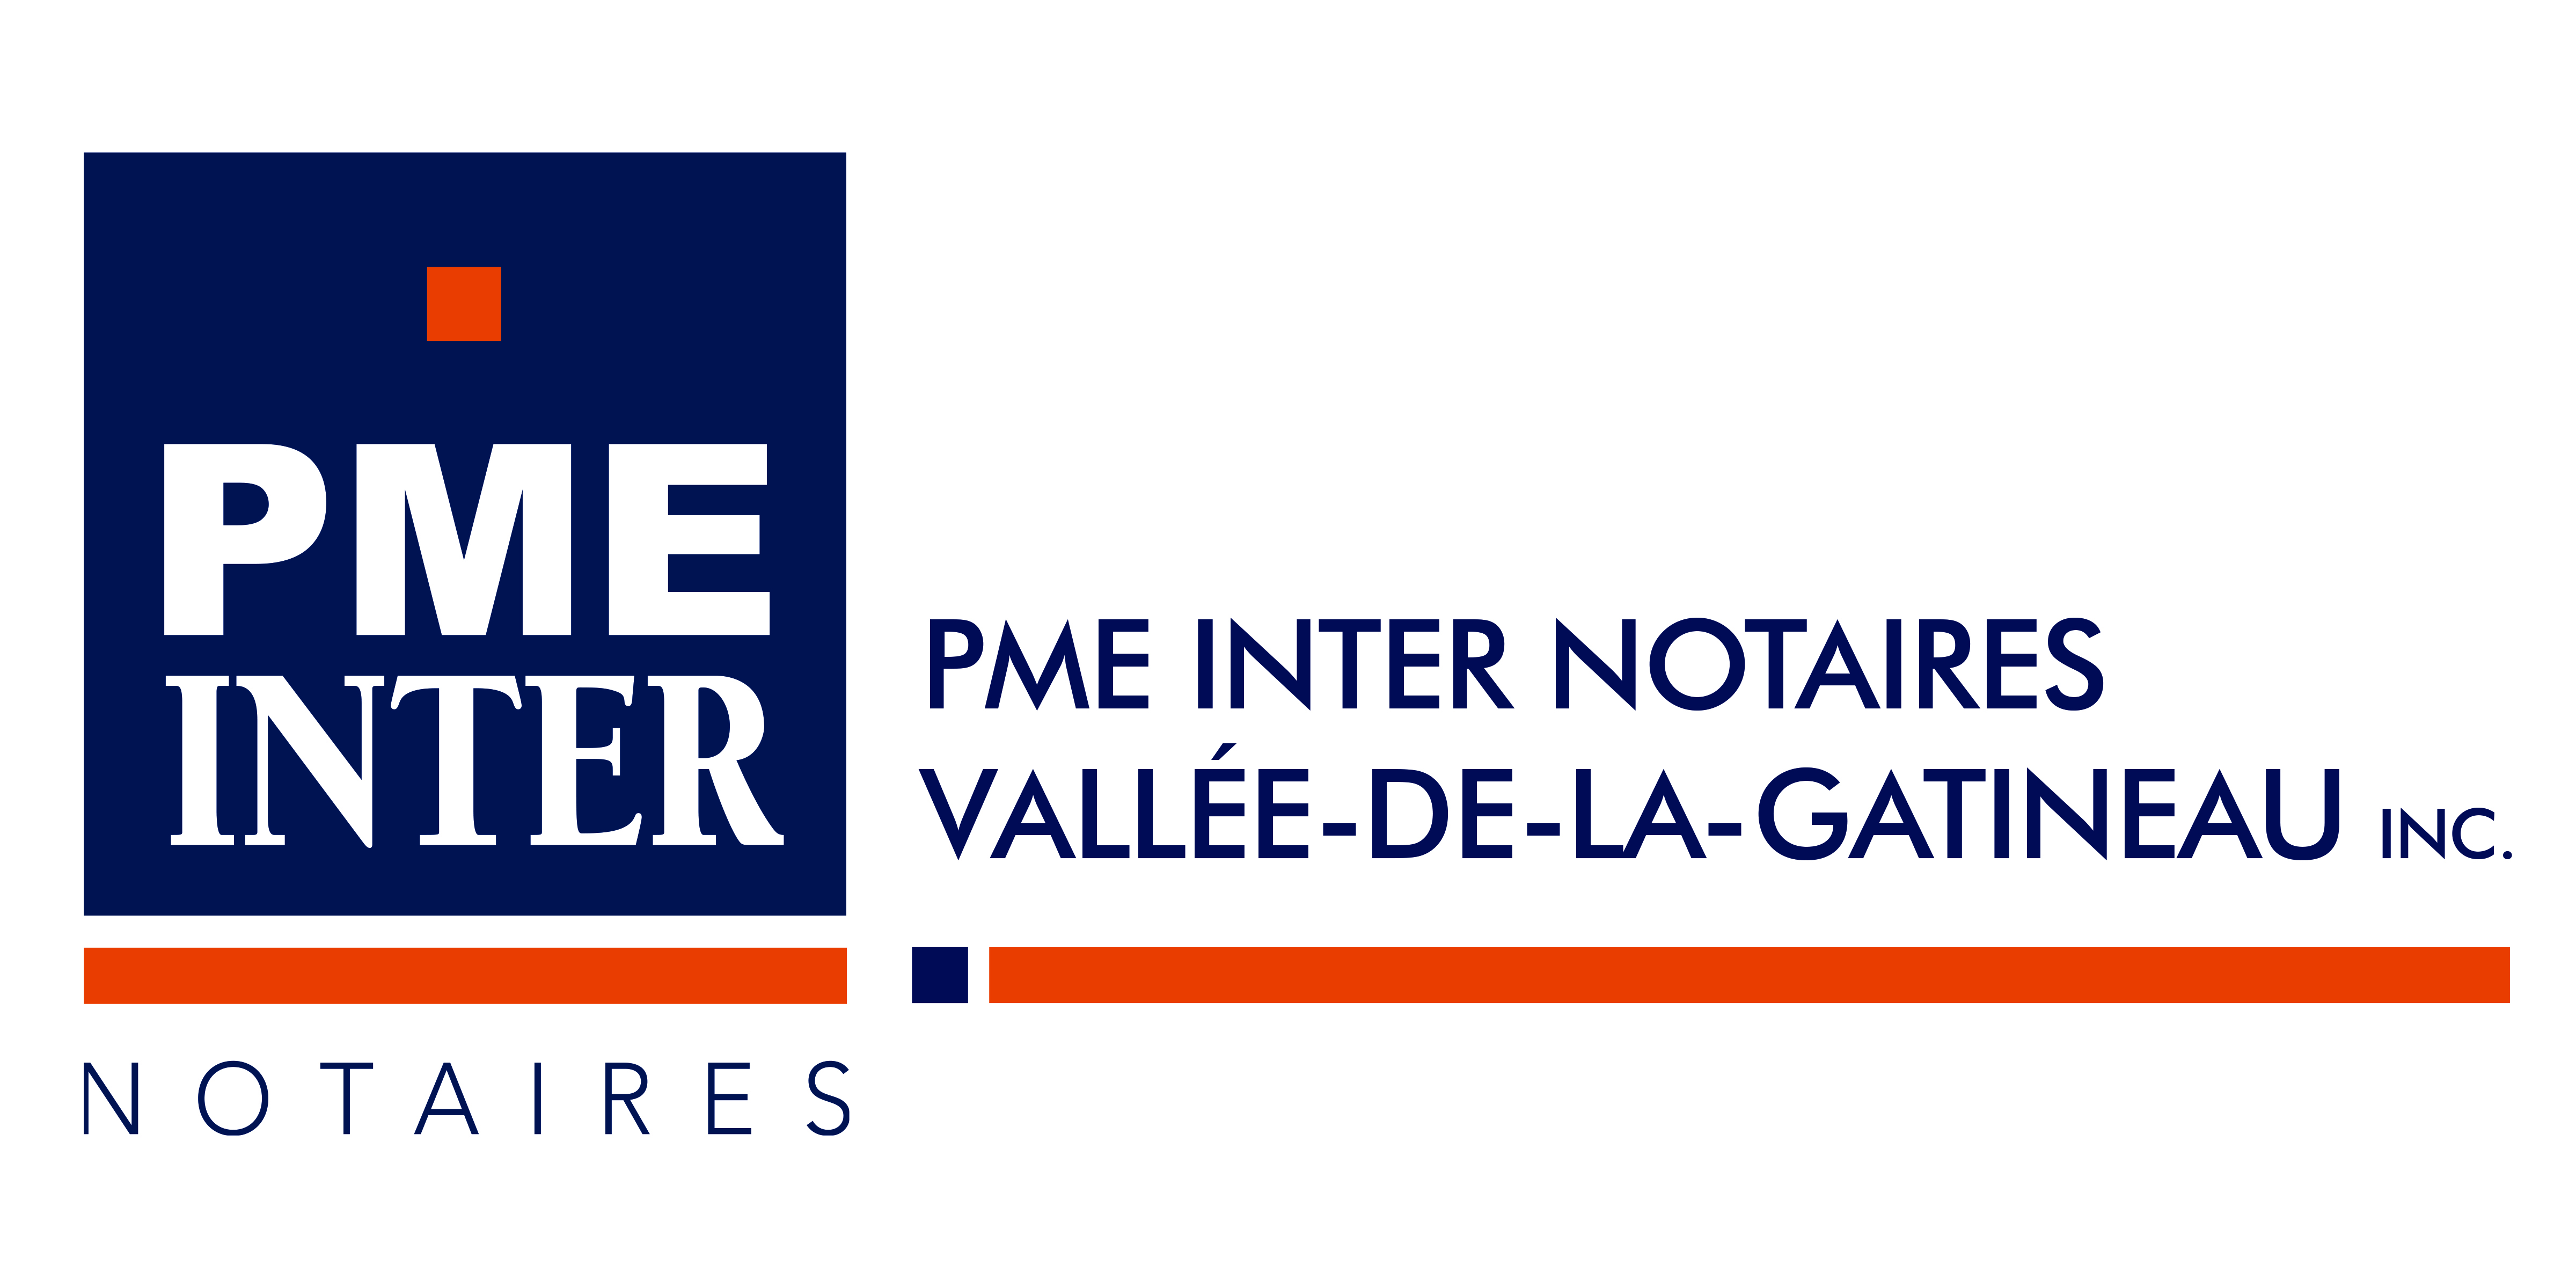 PME Inter Notaires VG copy